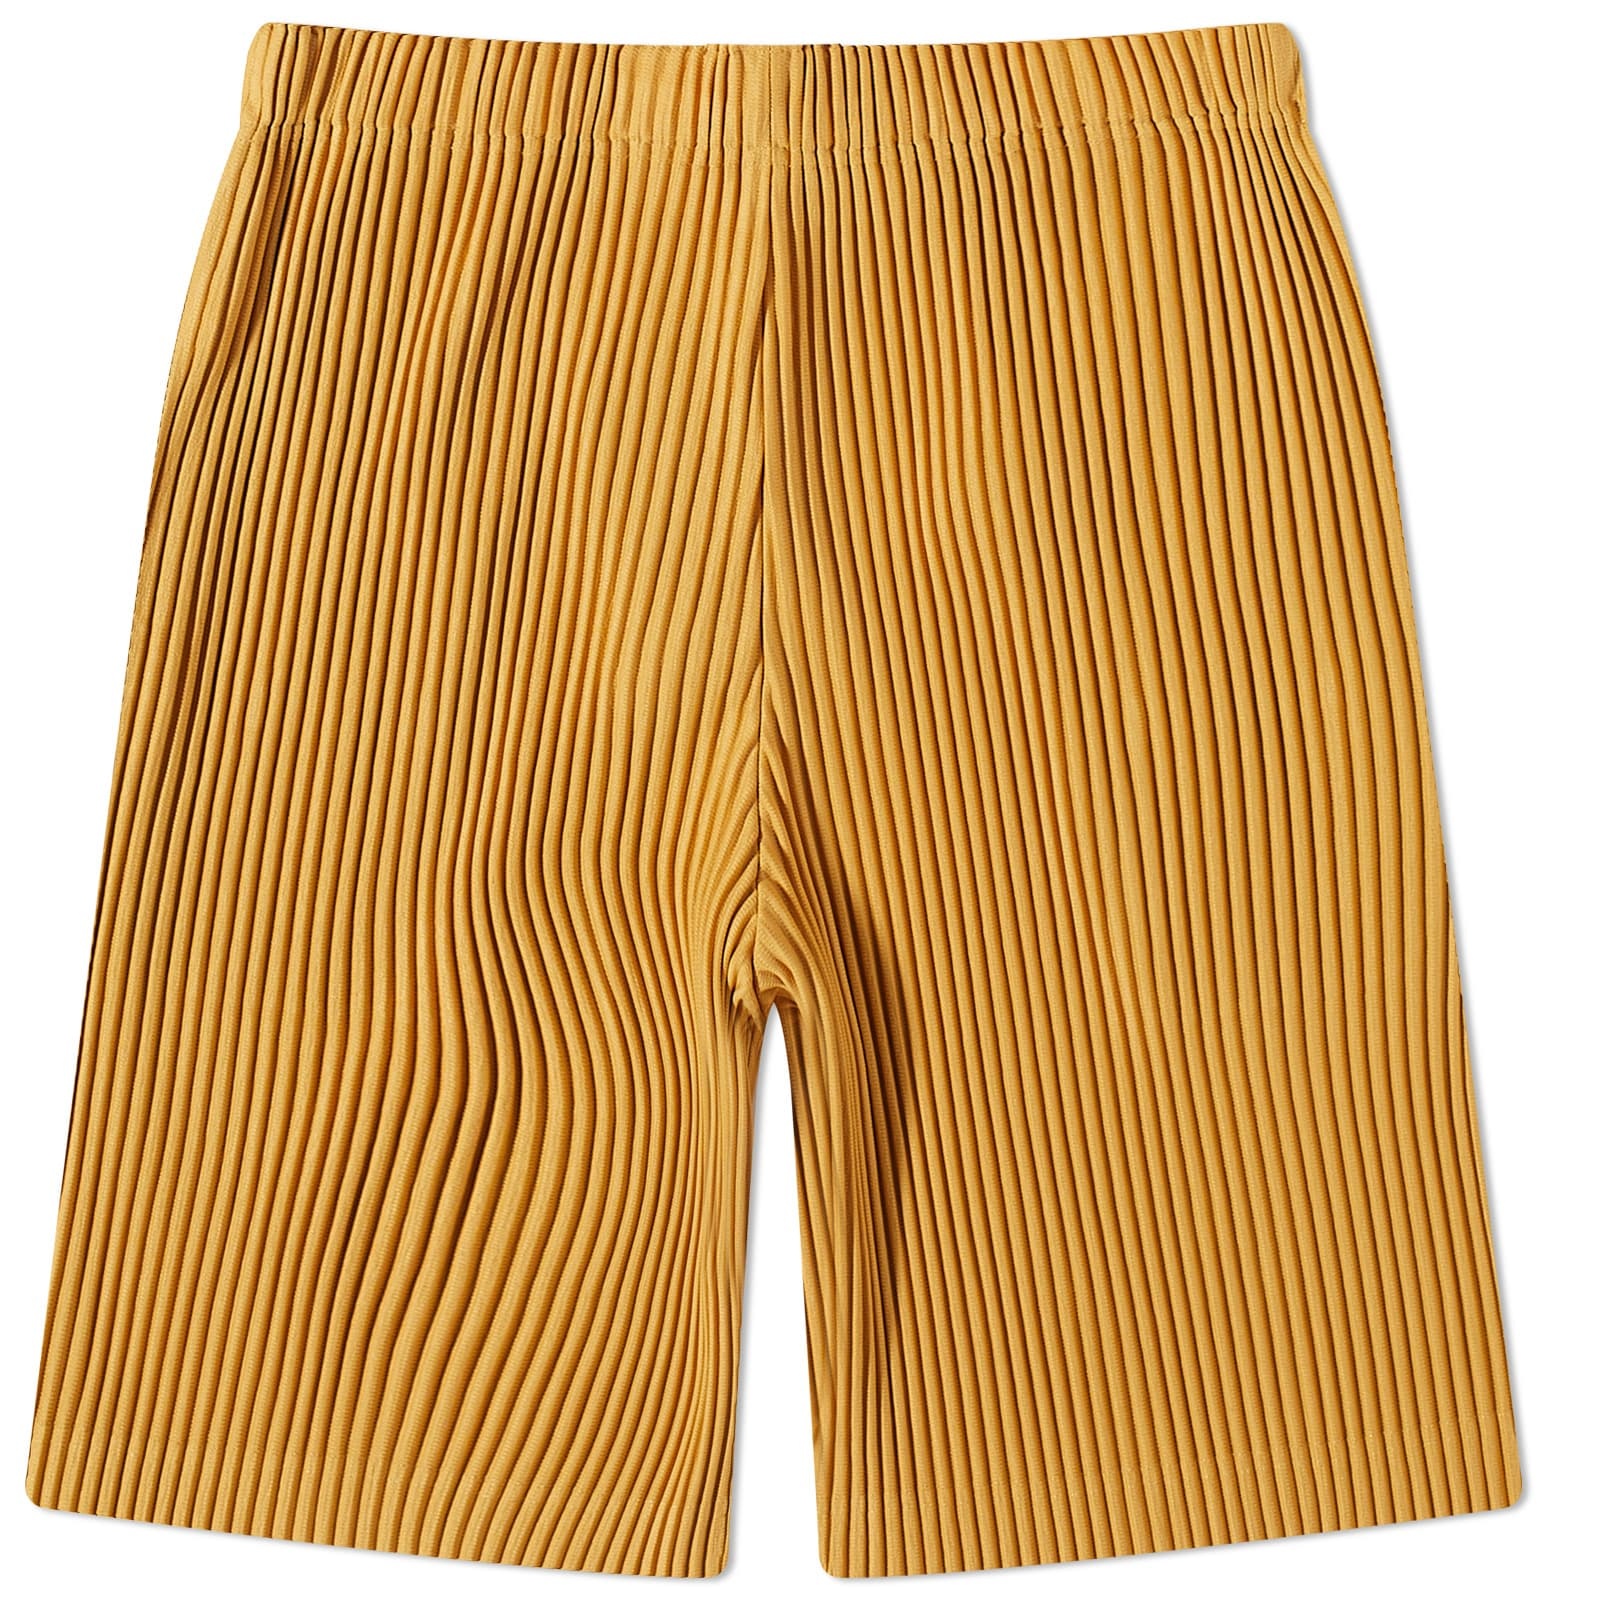 Homme Plissé Issey Miyake Pleated Shorts - 2